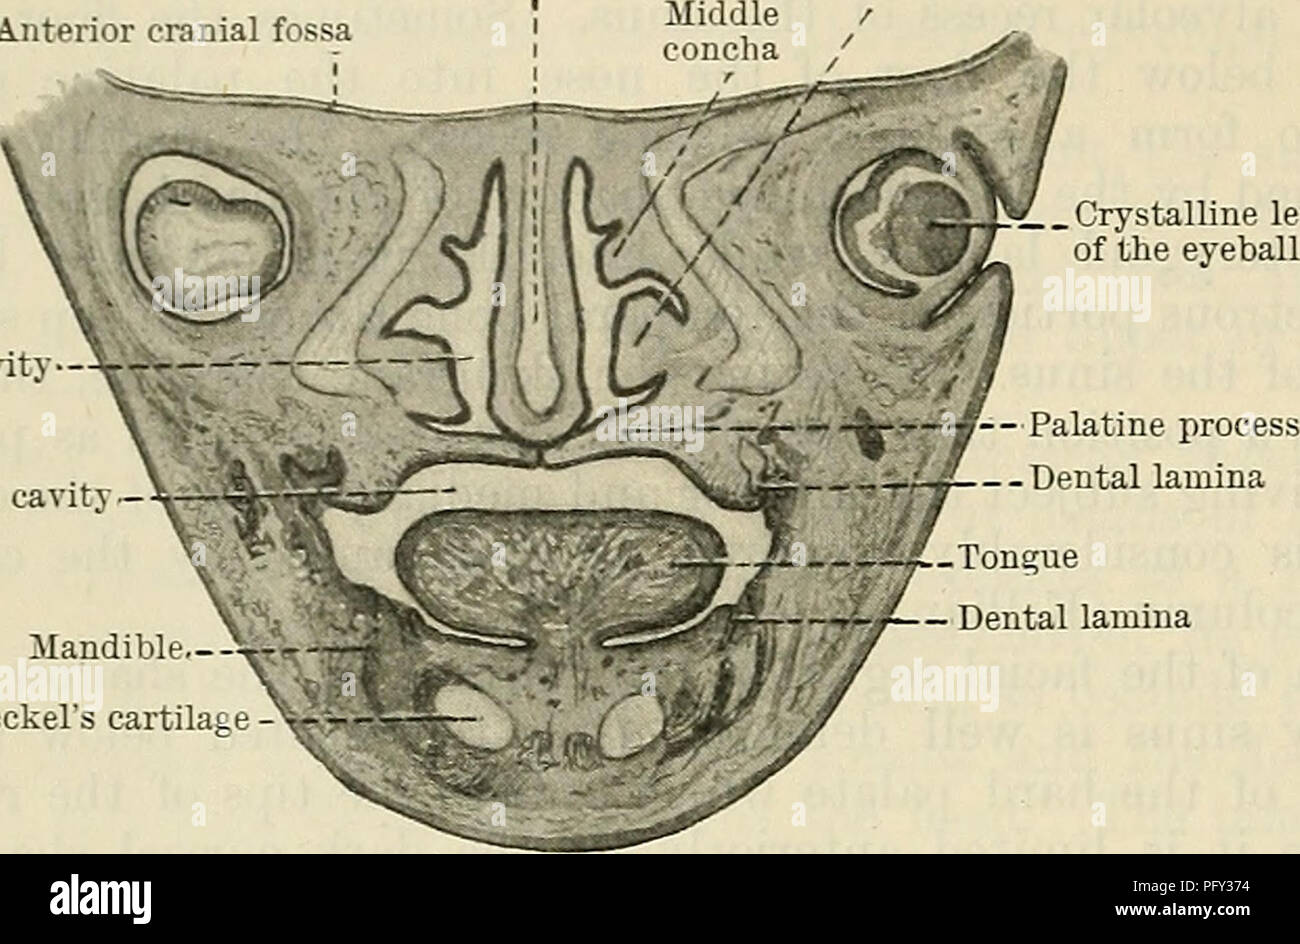 . Cunningham's Text-book of anatomy. Anatomy. 1380 SUKFACE AND SUEGICAL ANATOMY. Nasal septum Anterior cranial fossa i Inferior concha L.   Crystalline lens of the eyeball Nasal cavity. Buccal cavity Mandible.-- Meckel's cartilage Fig. 10S0.- -Coronal Section through the Face of at the Seventh Week. Human Embryo not extend forwards into the hard palate. The cleft in the latter is spoken of as single or double according to whether the palatal processes have failed to unite with the lower edge of the nasal septum on one, or on both, sides. When the cleft extends forwards through the alveolar pro Stock Photo